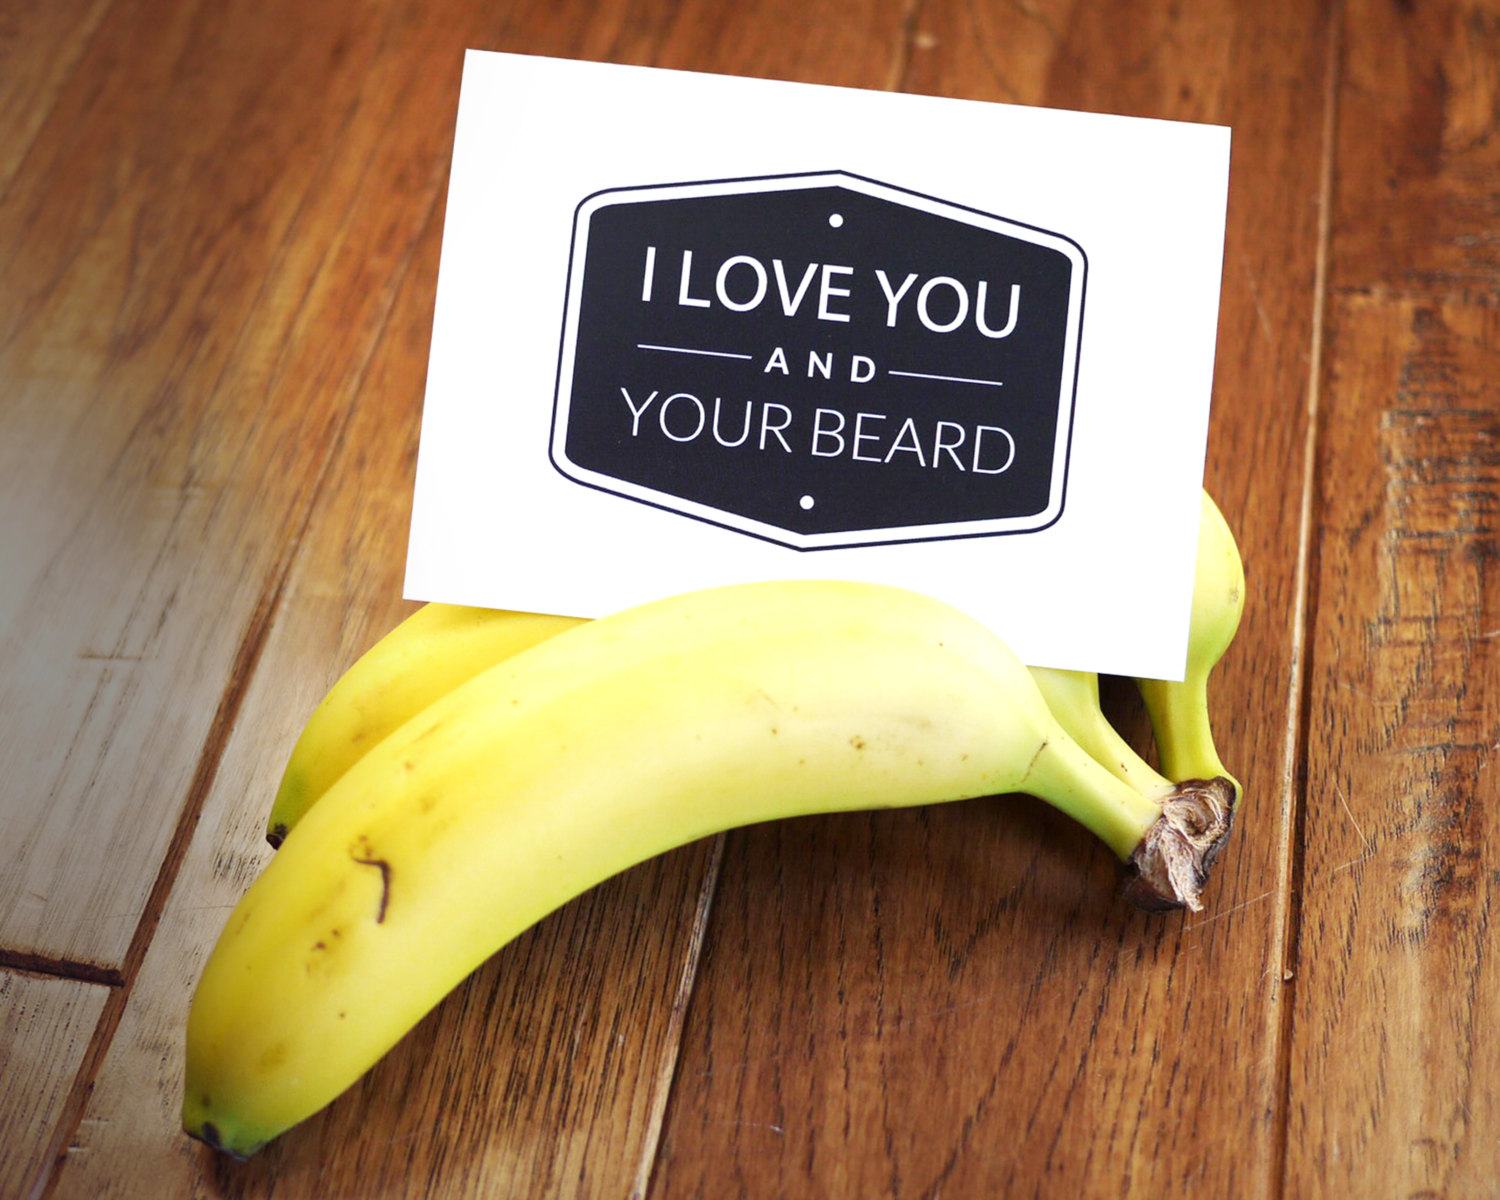 i love you and your beard - via funny valentine cards etsy from EmmalineBride.com